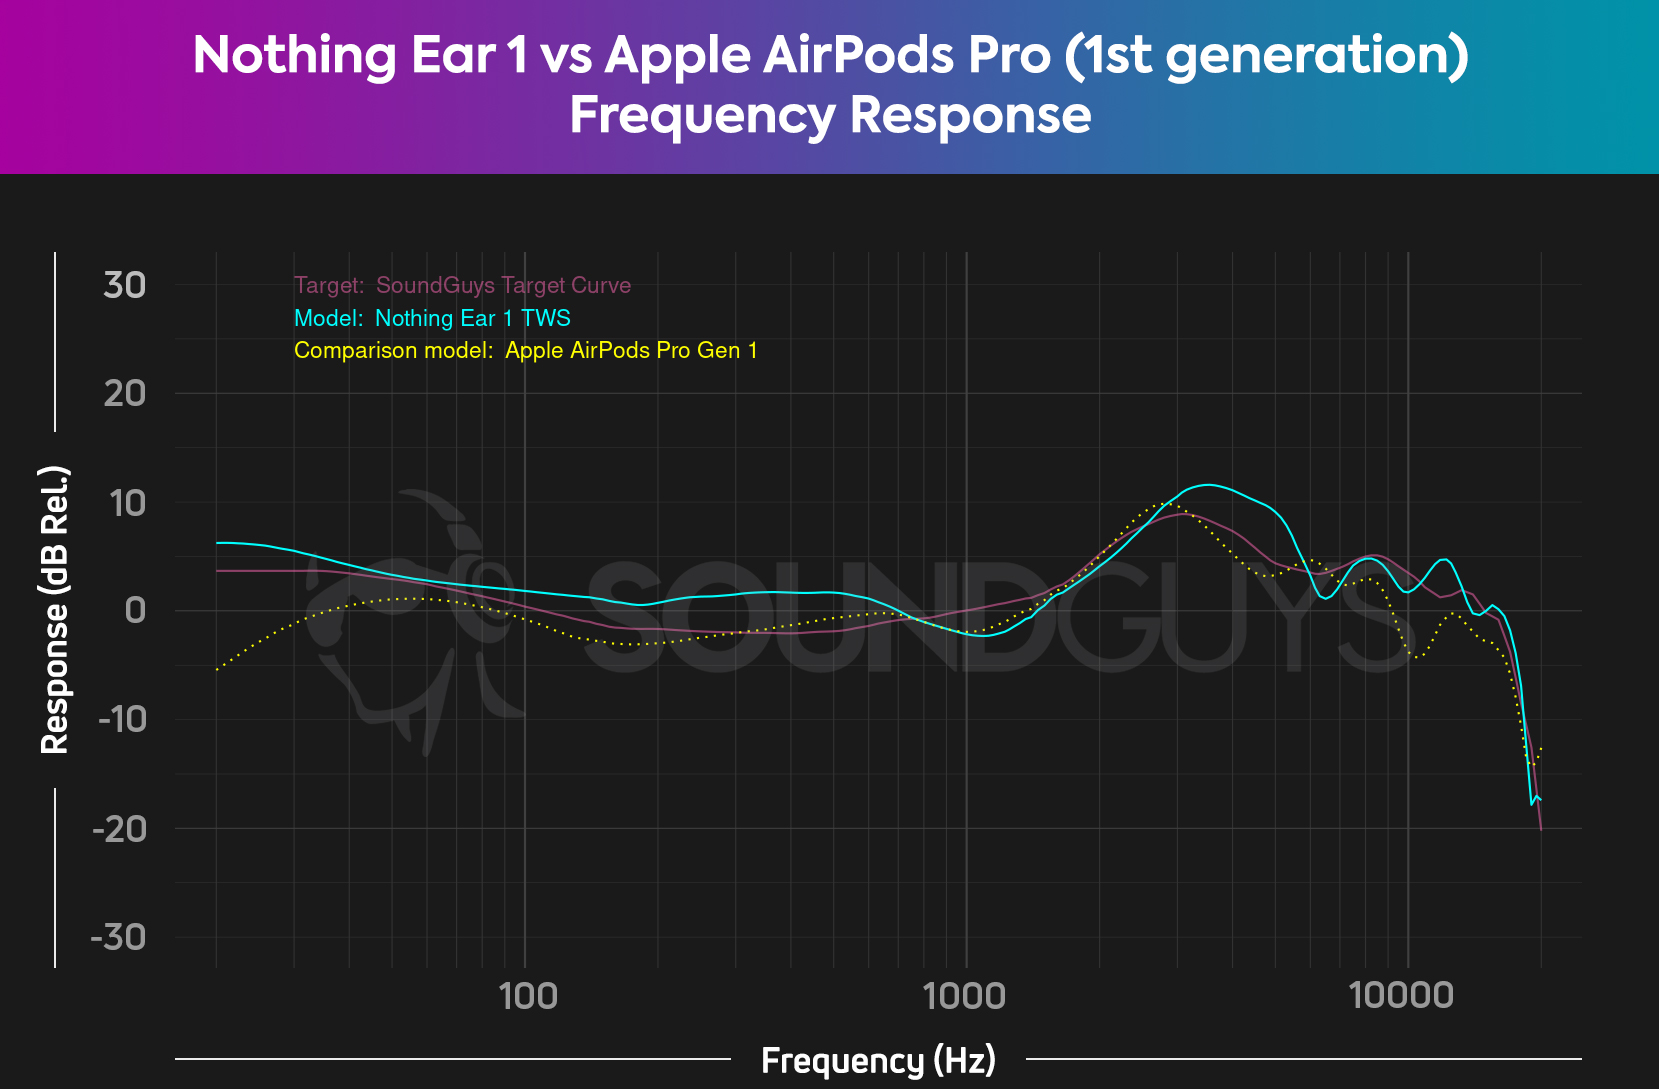 A chart showing the frequency response of the Apple AirPods Pro frequency response in comparison to the Nothing Ear 1 and our house consumer curve.